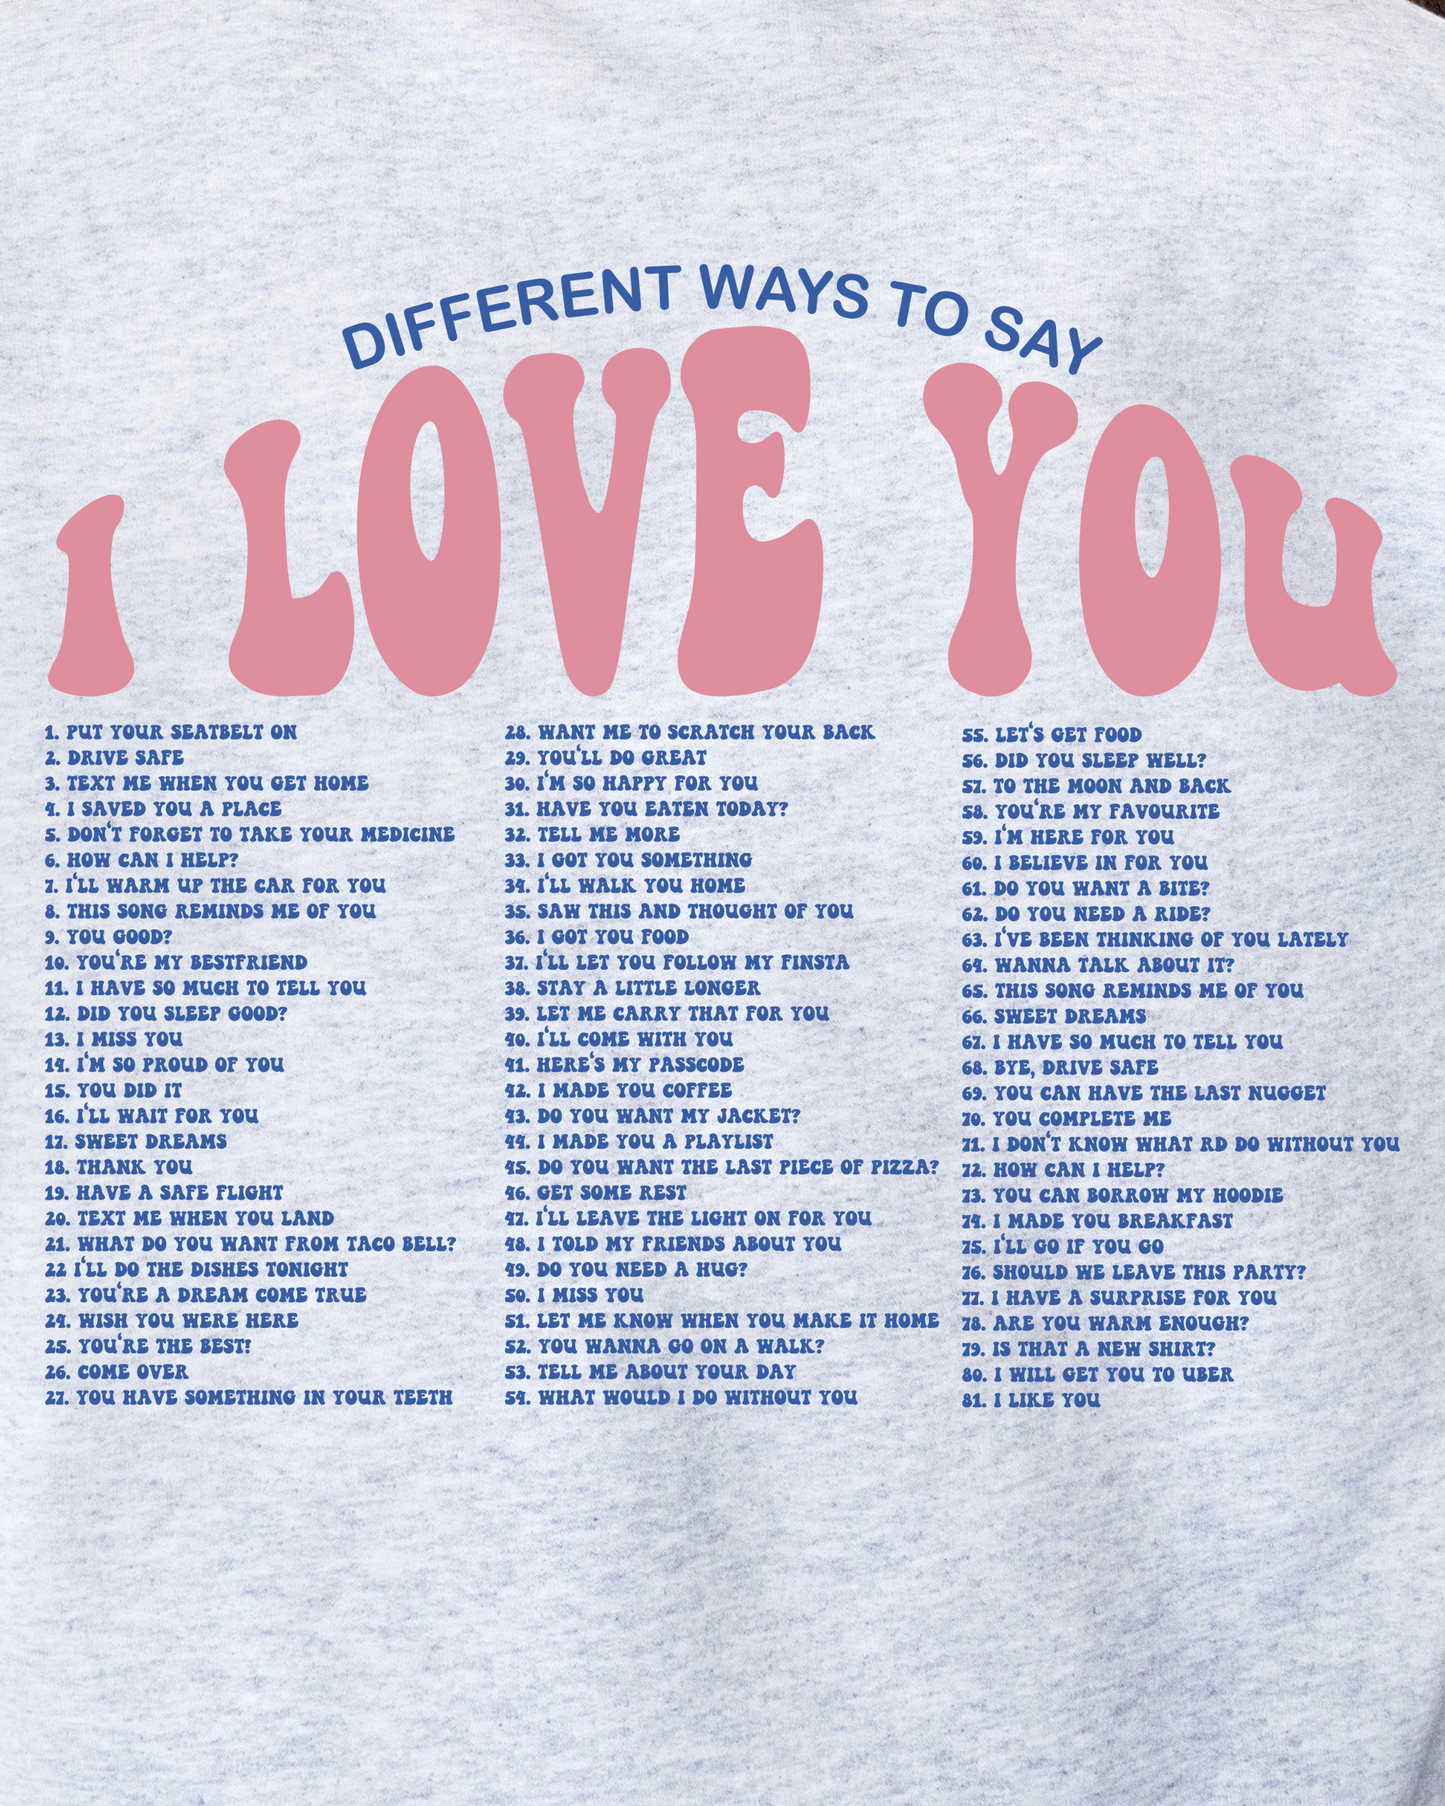 DIFFERENT WAYS TO SAY I LOVE YOU SWEATSHIRT